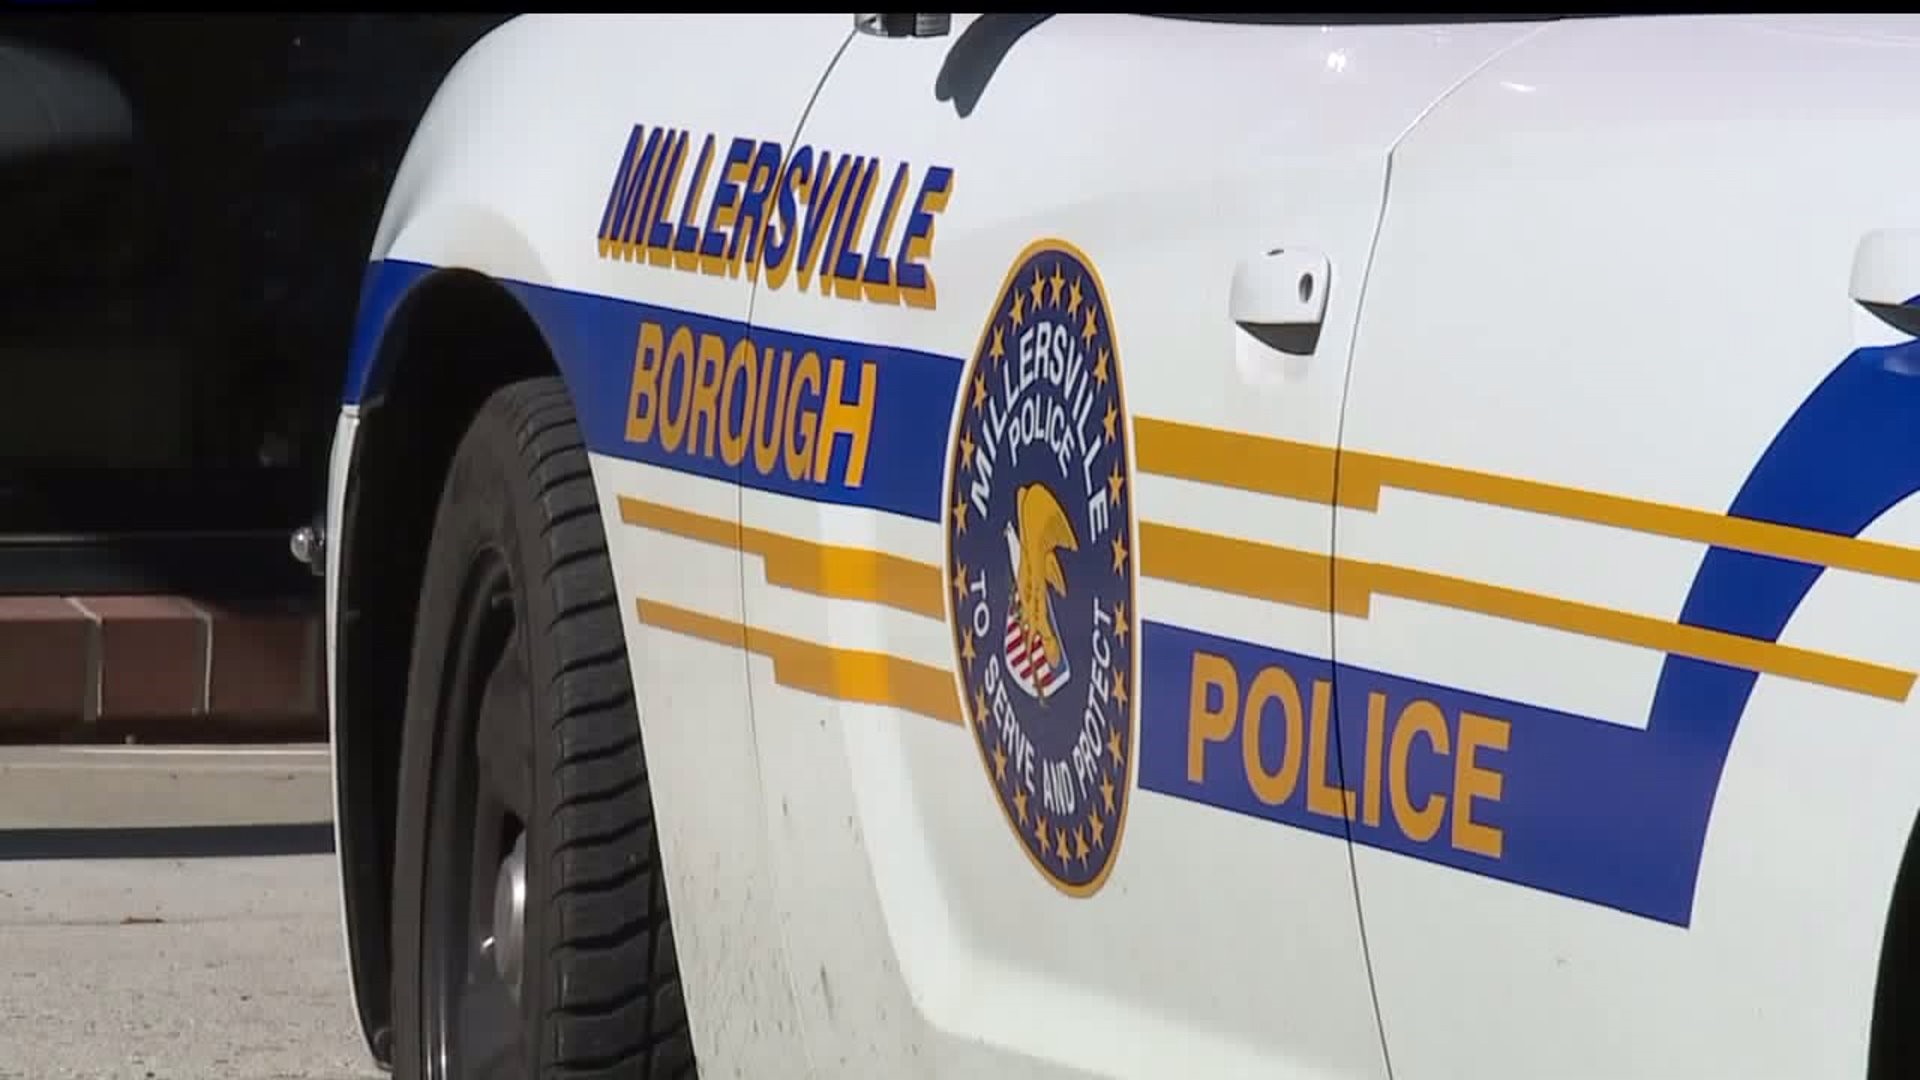 Millersville Borough Police irked by decision to release student facing threat charges